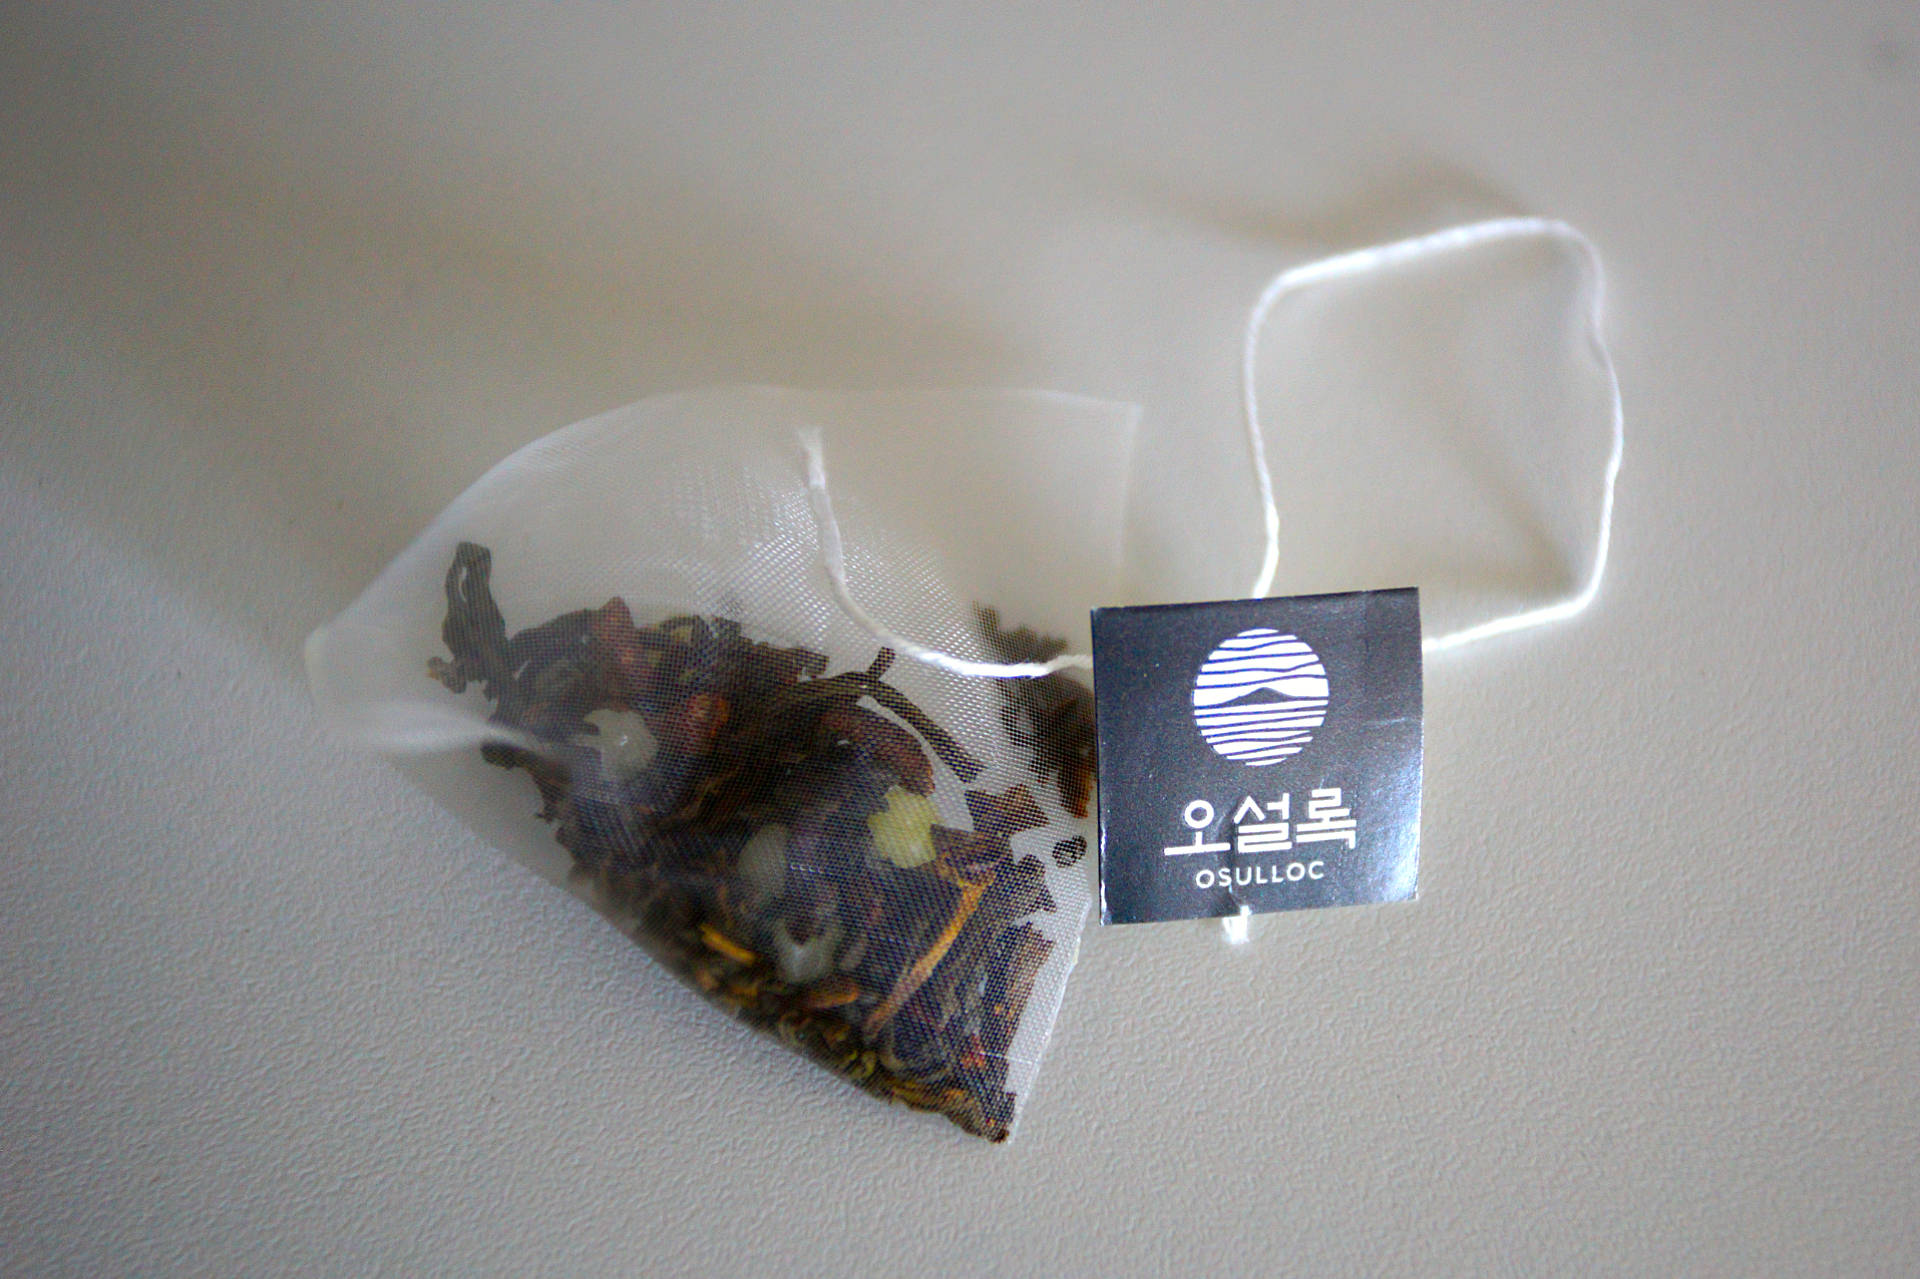 Moon Walk tea in pyramid bags from Osulloc Tea smells rich and fruity!